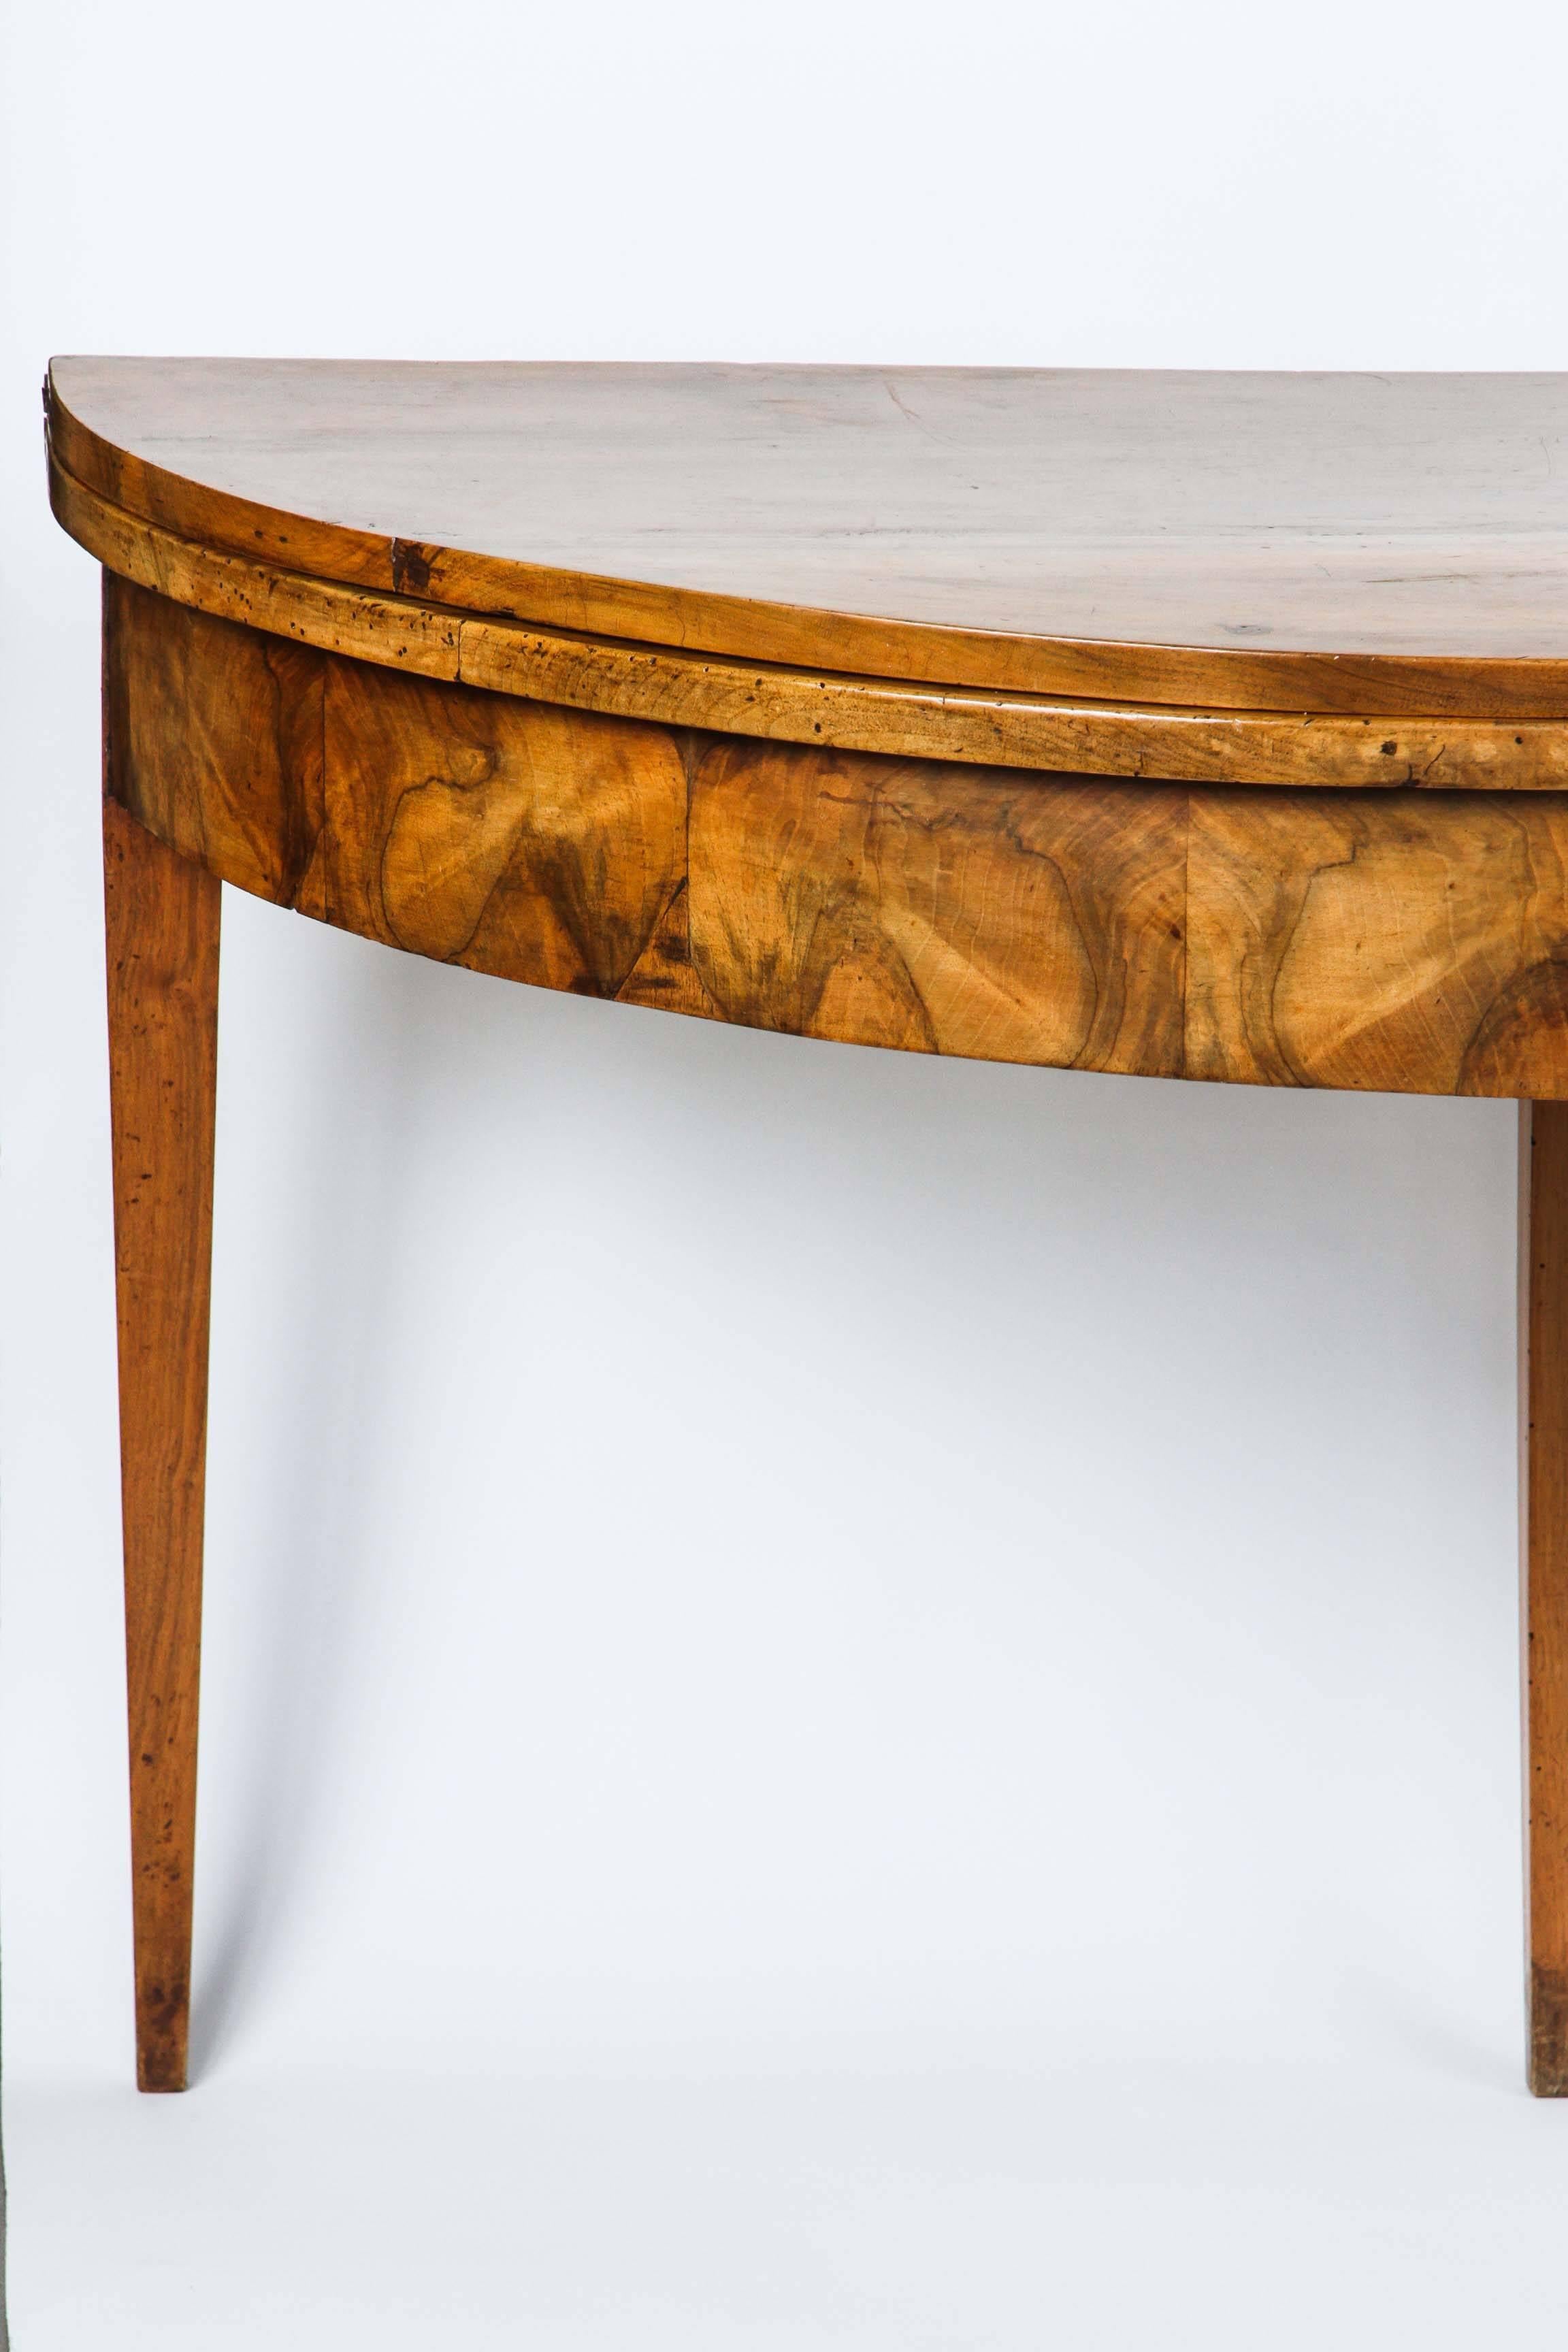 A large-scale French walnut demilune fold-over table with back centre pull-out leg (includes a drawer). It has the original, beautiful patina, circa 1820-1840.